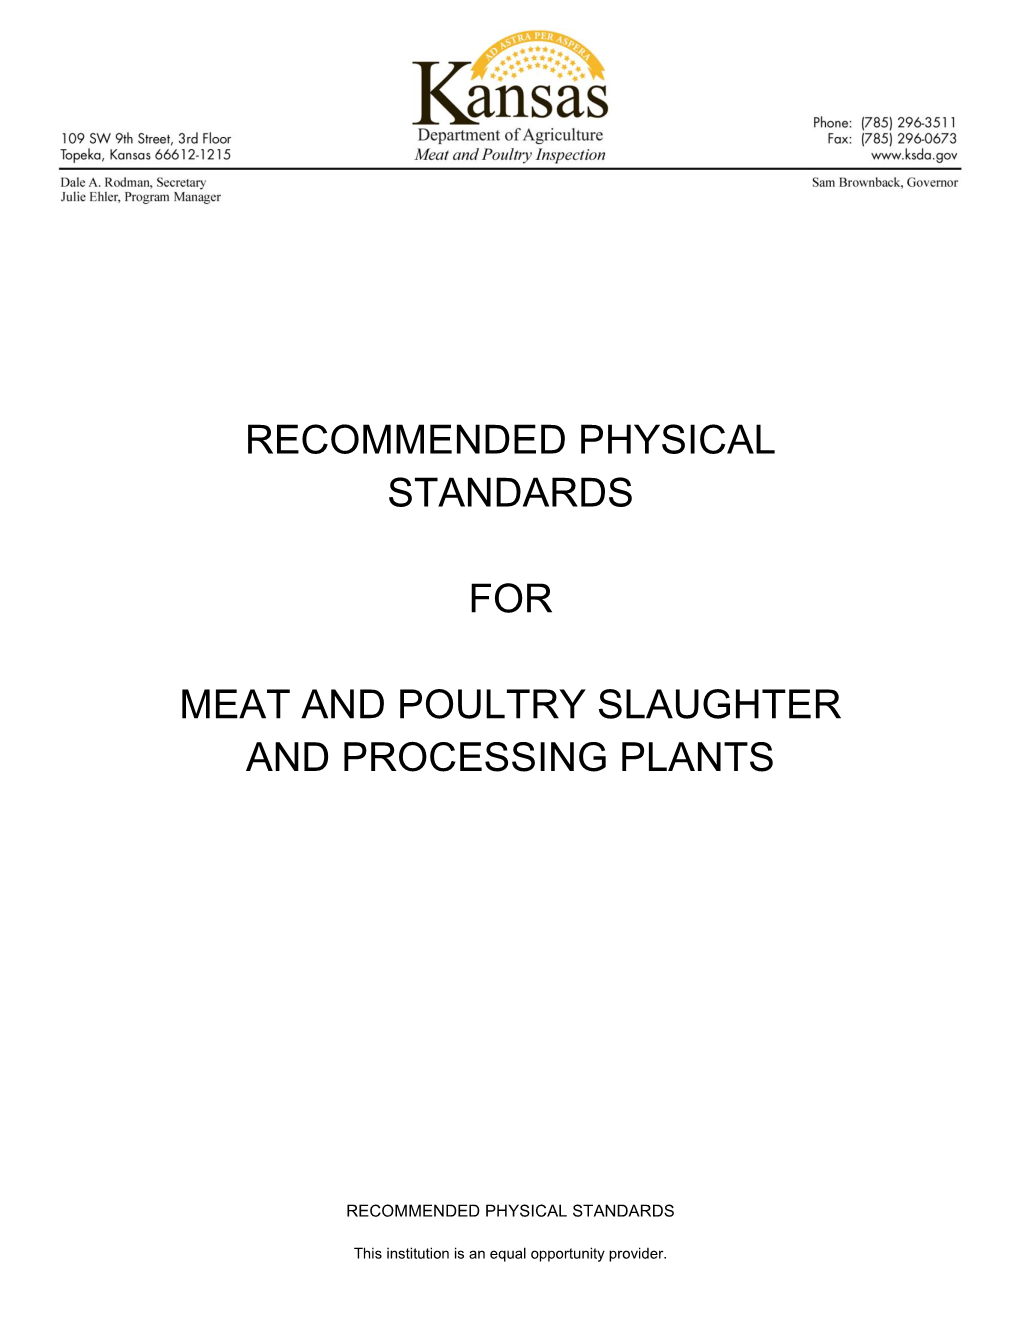 Recommended Physical Standards for Meat and Poultry Slaughter And